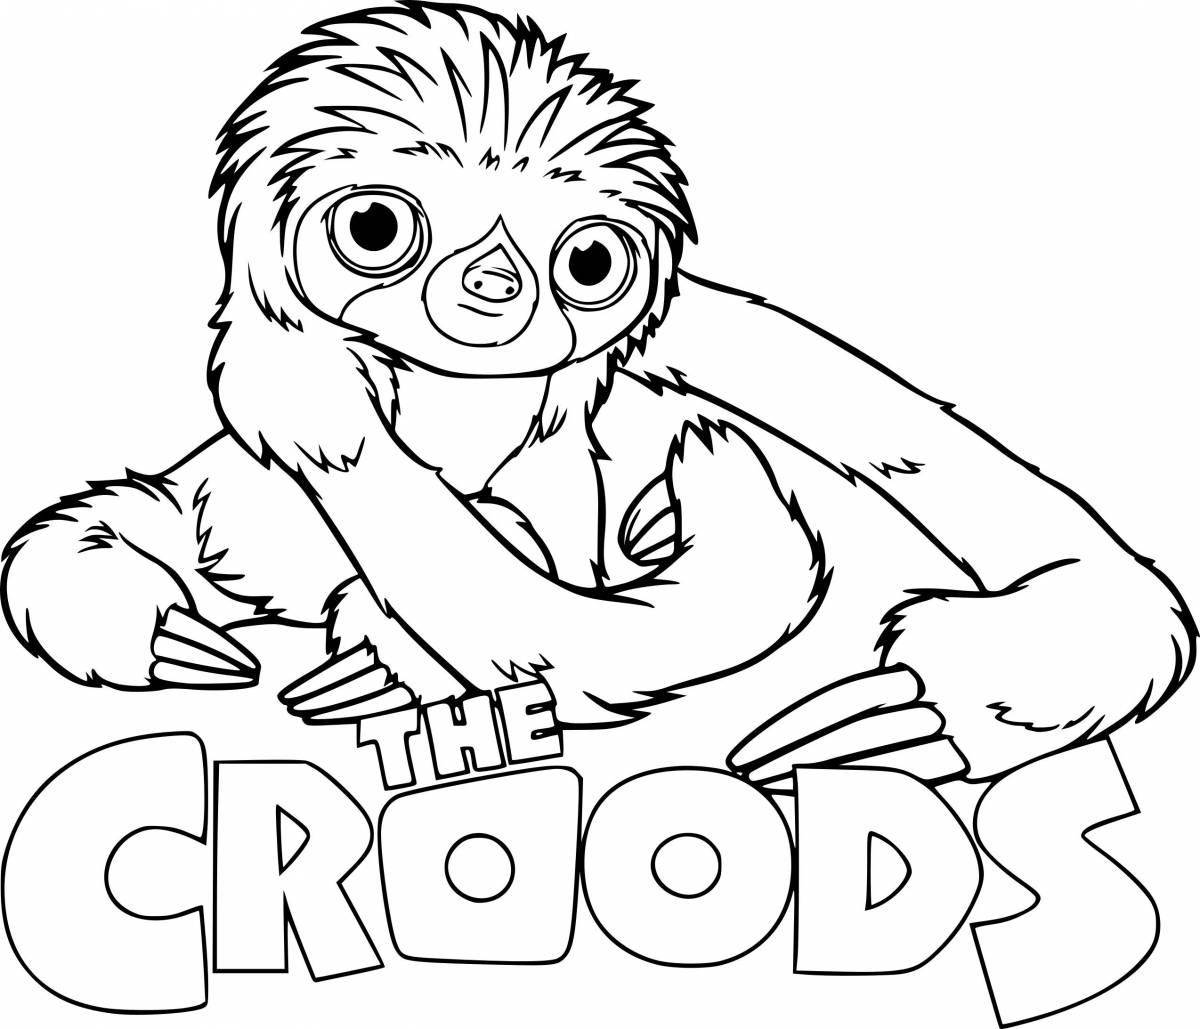 Adorable sloth coloring book for kids